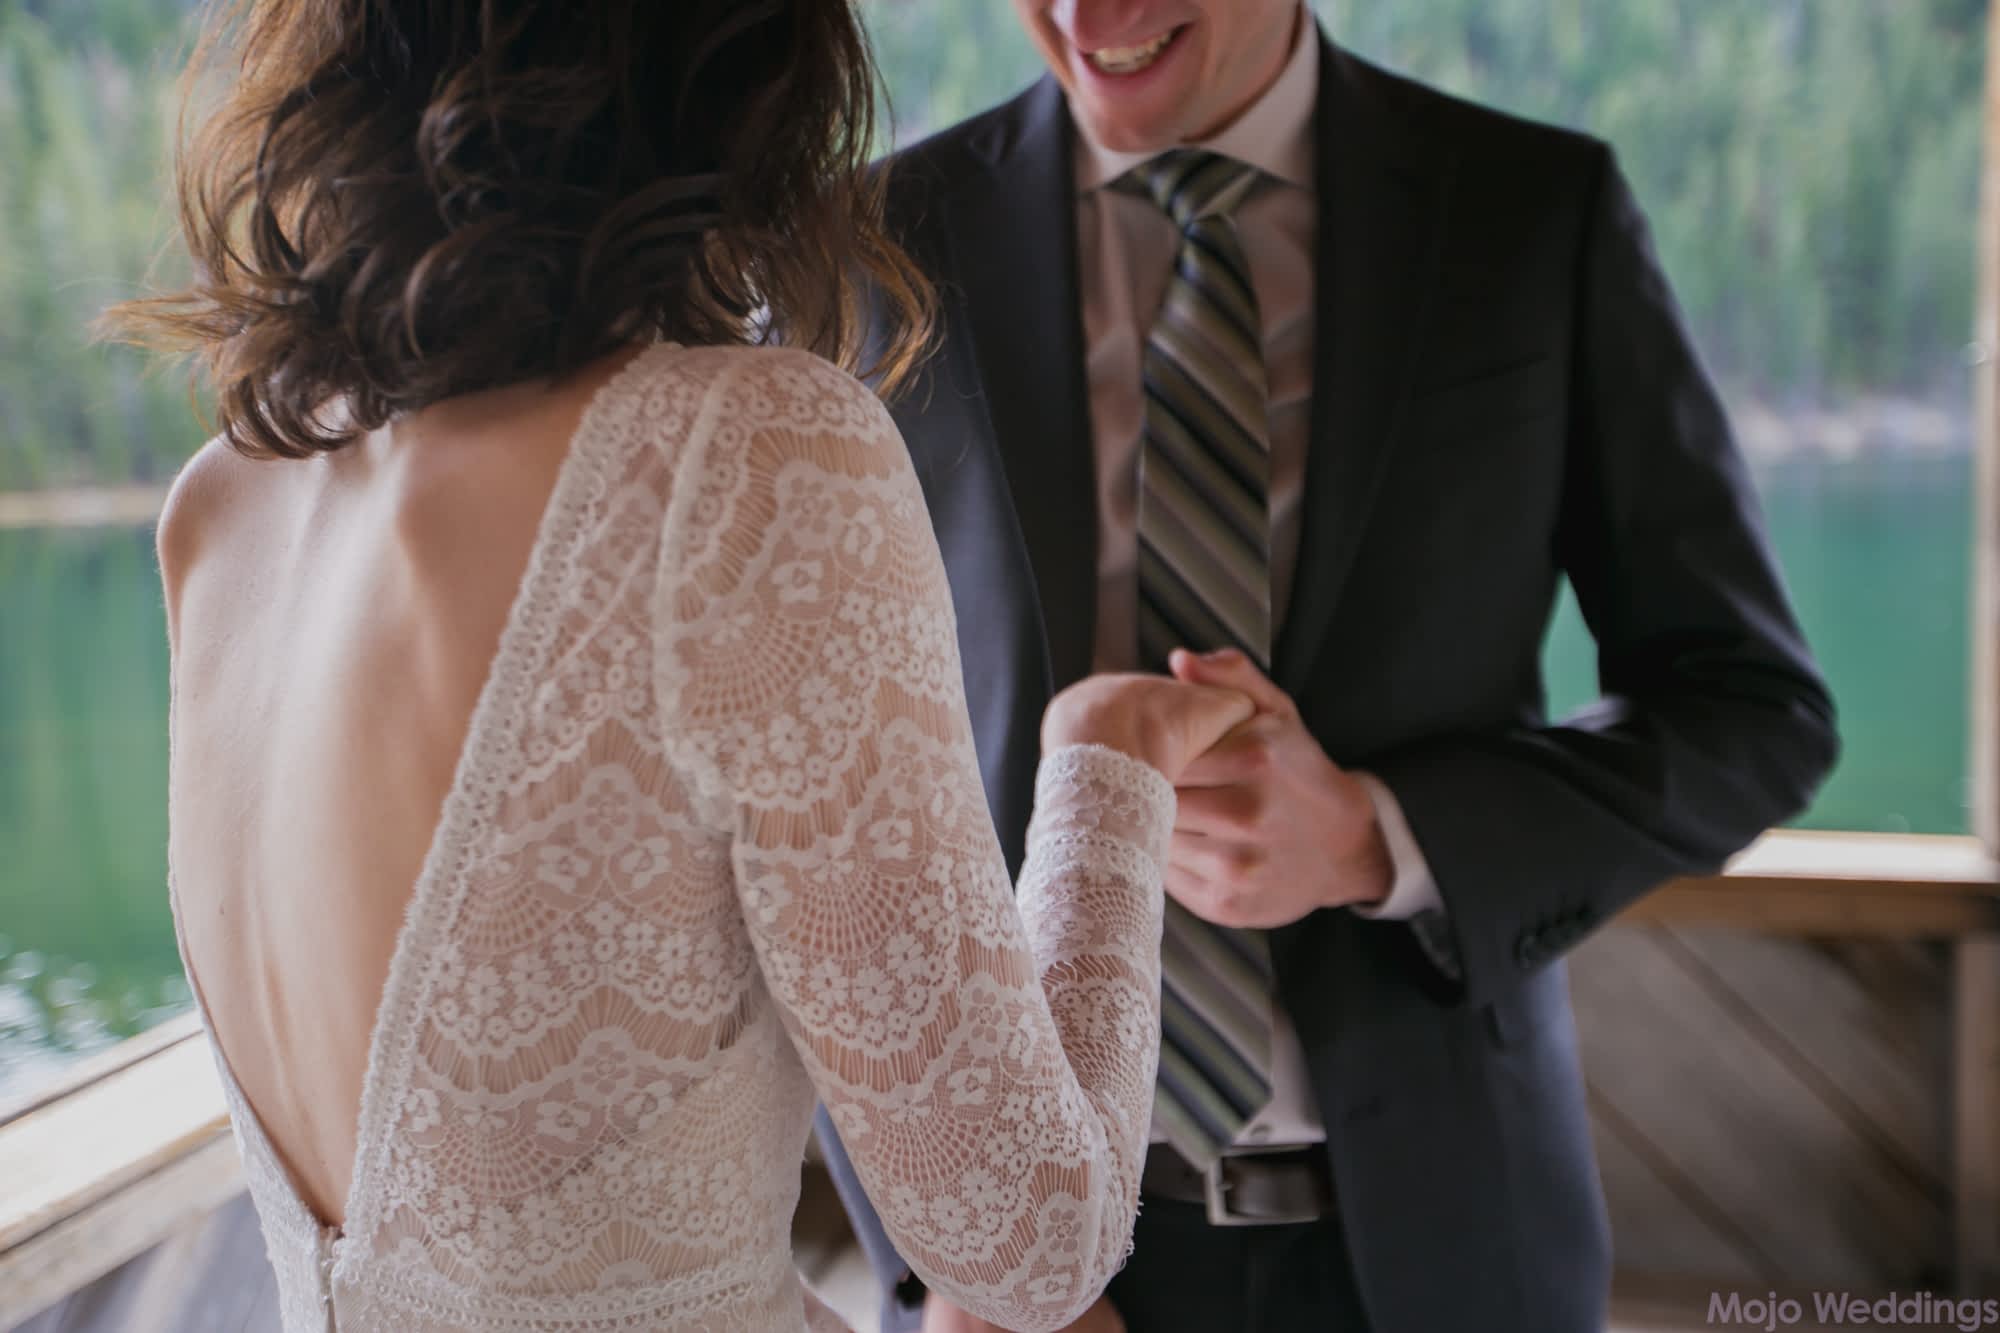 A close up of the brides lacy dress leads as the groom holds her hand.